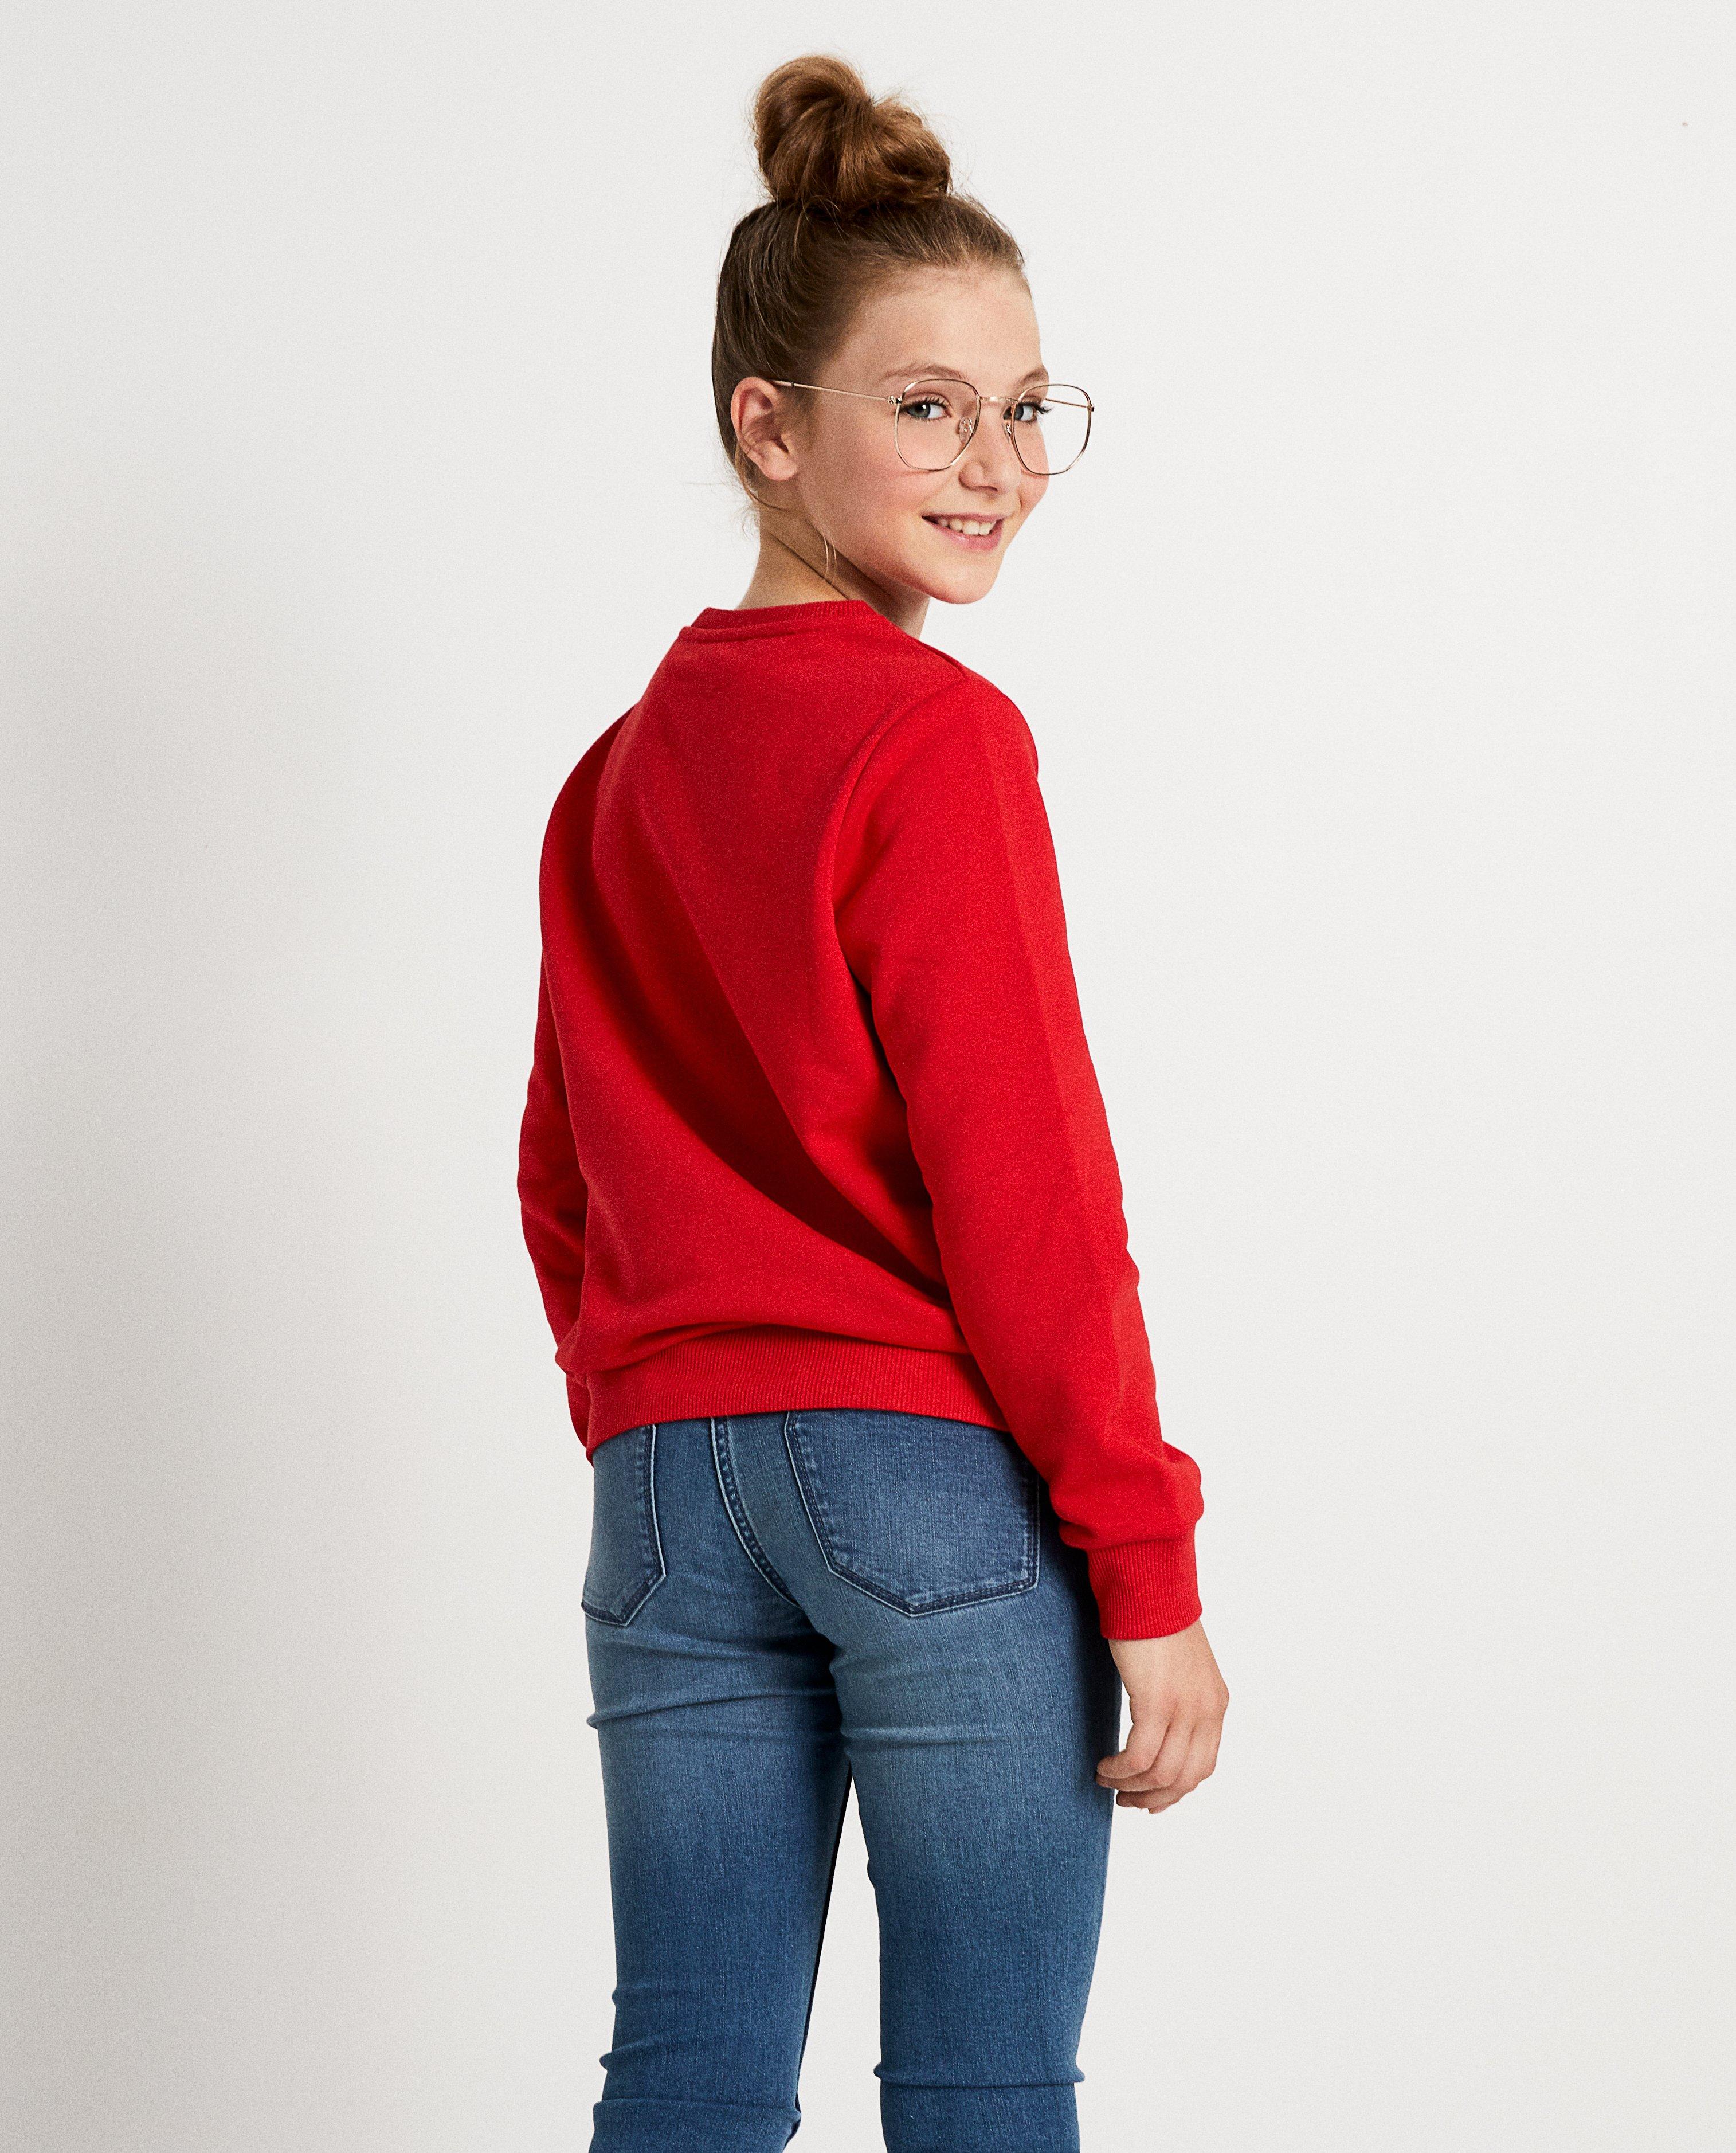 Sweaters - Rode sweater met opschrift #LikeMe